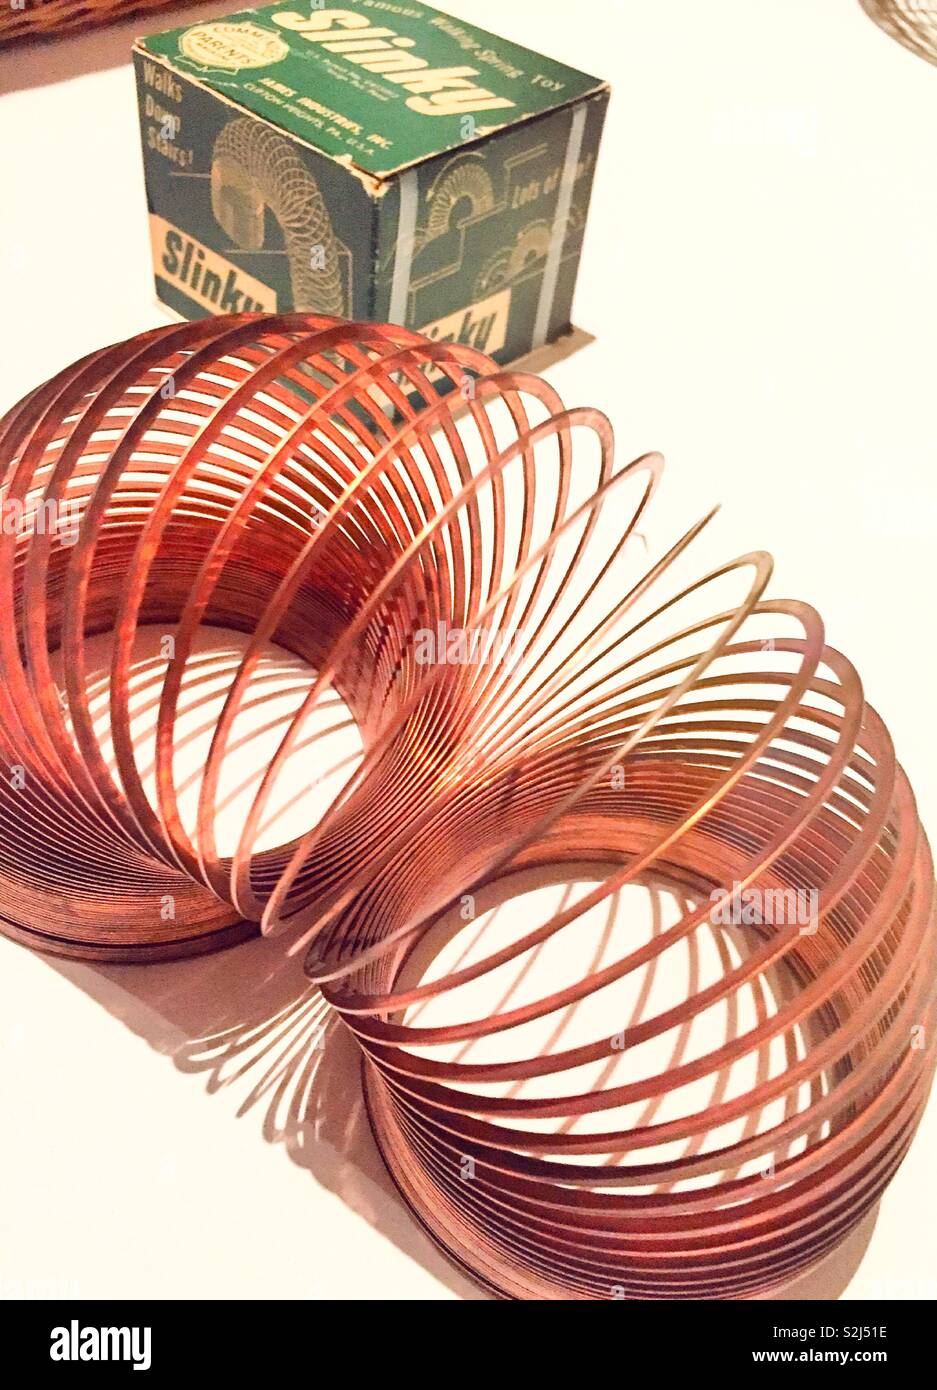 Slinky toy next to its original box from the 50s, USA Stock Photo